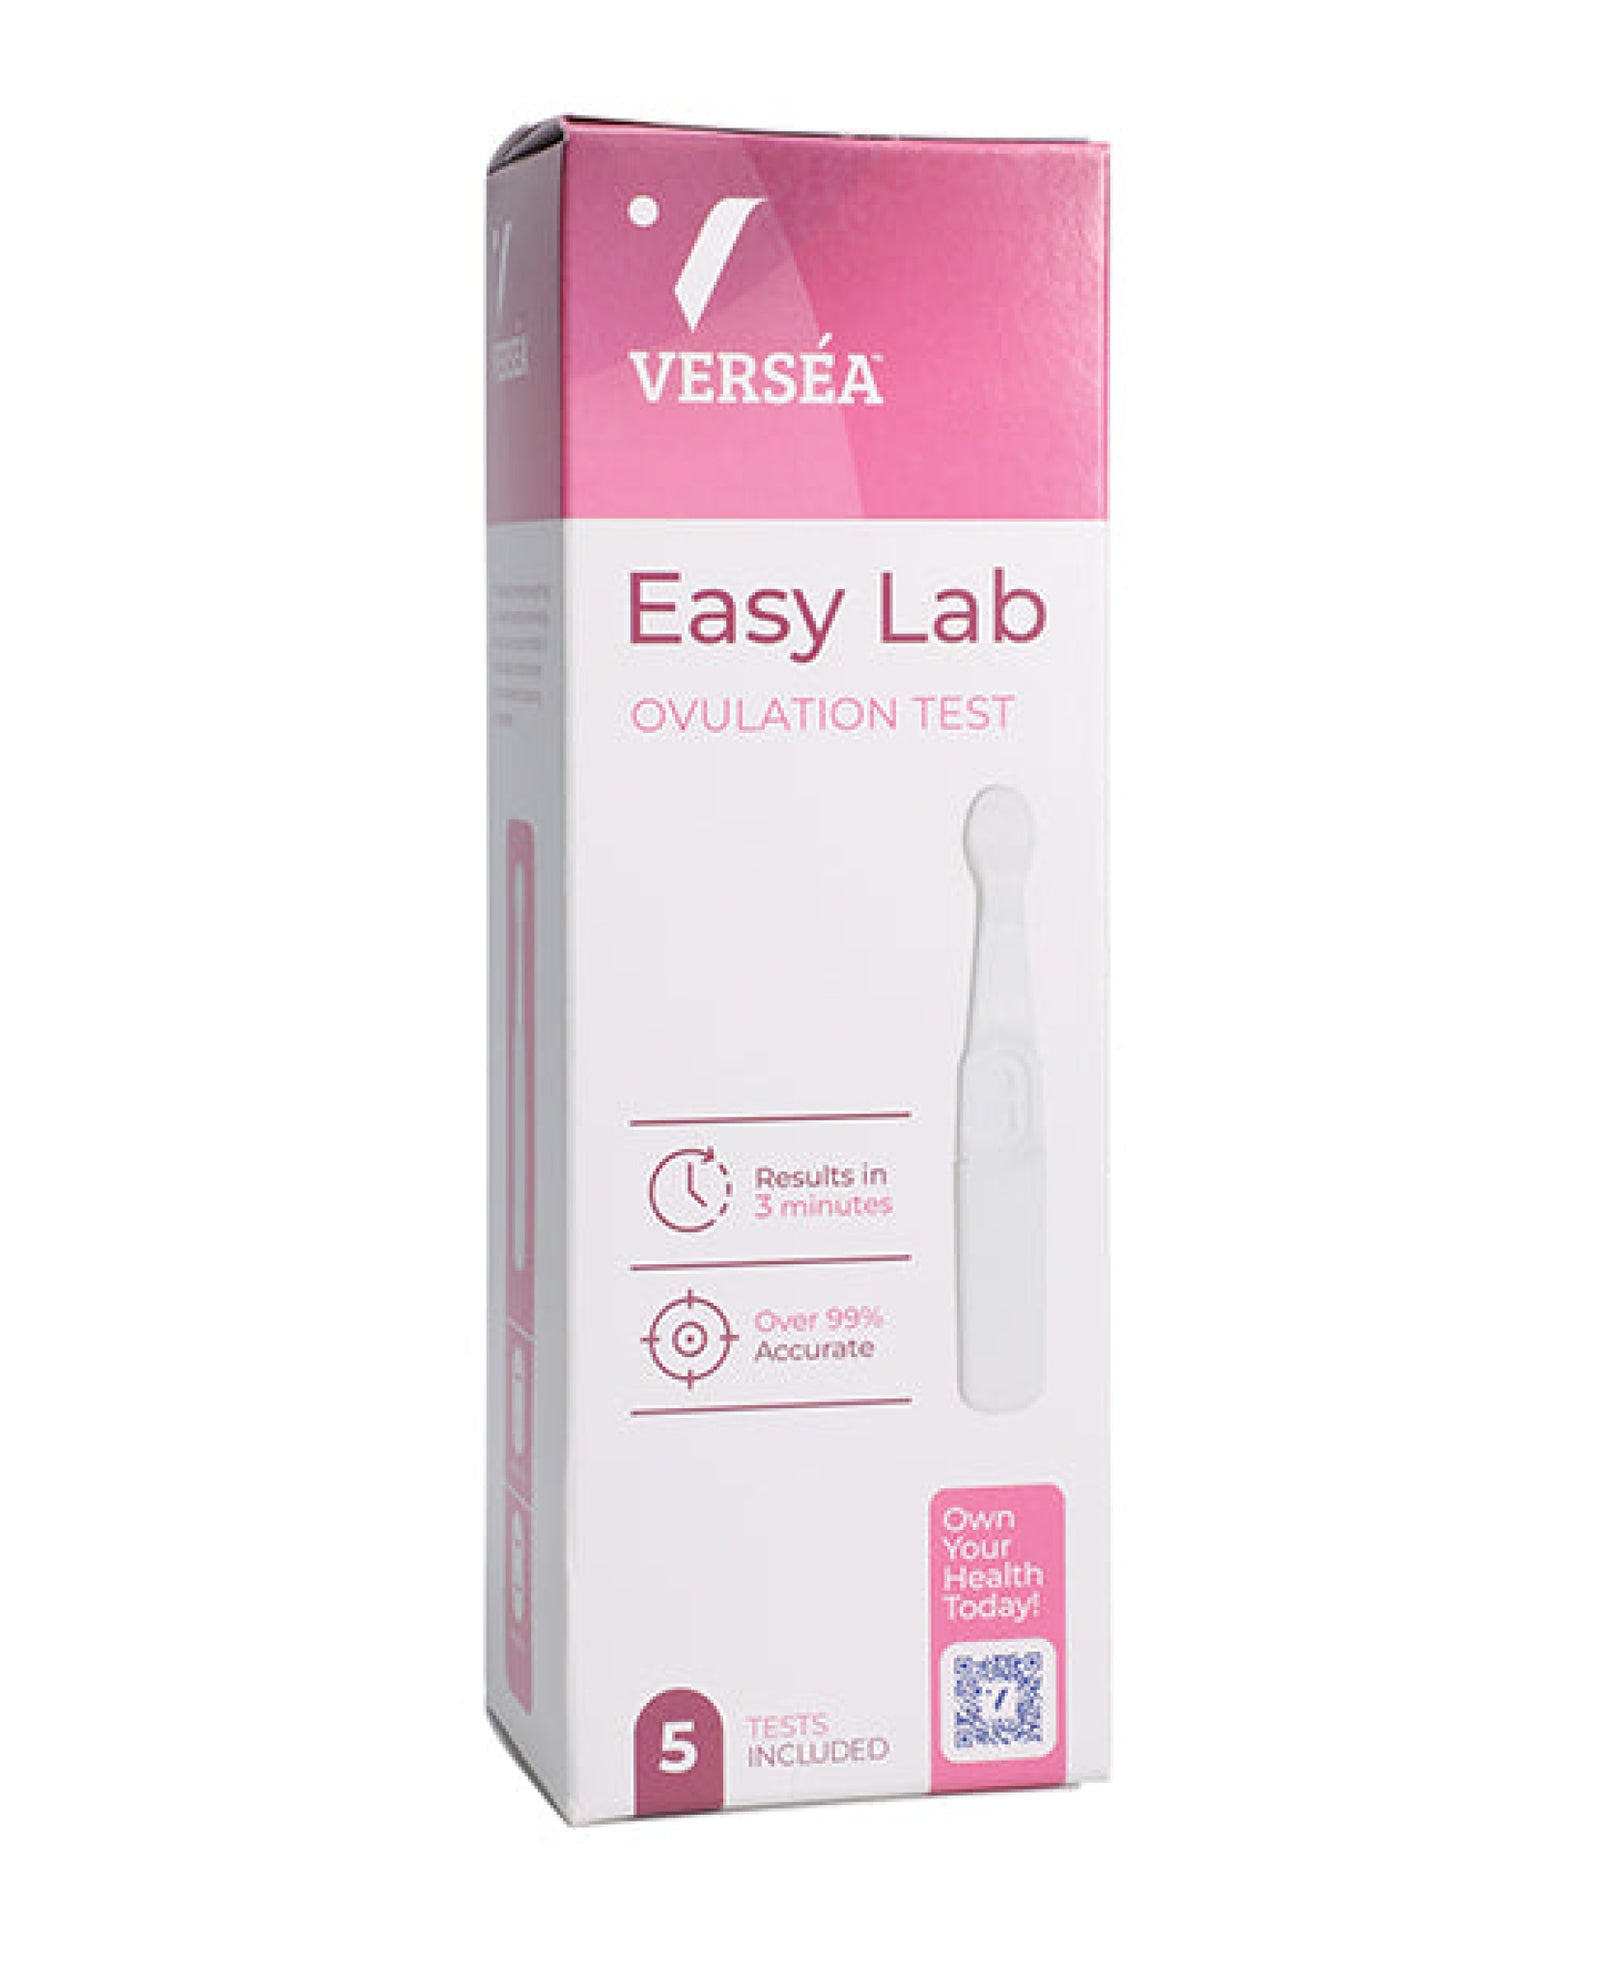 Versea EasyLab Ovulation Test - Pack of 5 Doc Johnson Consignment